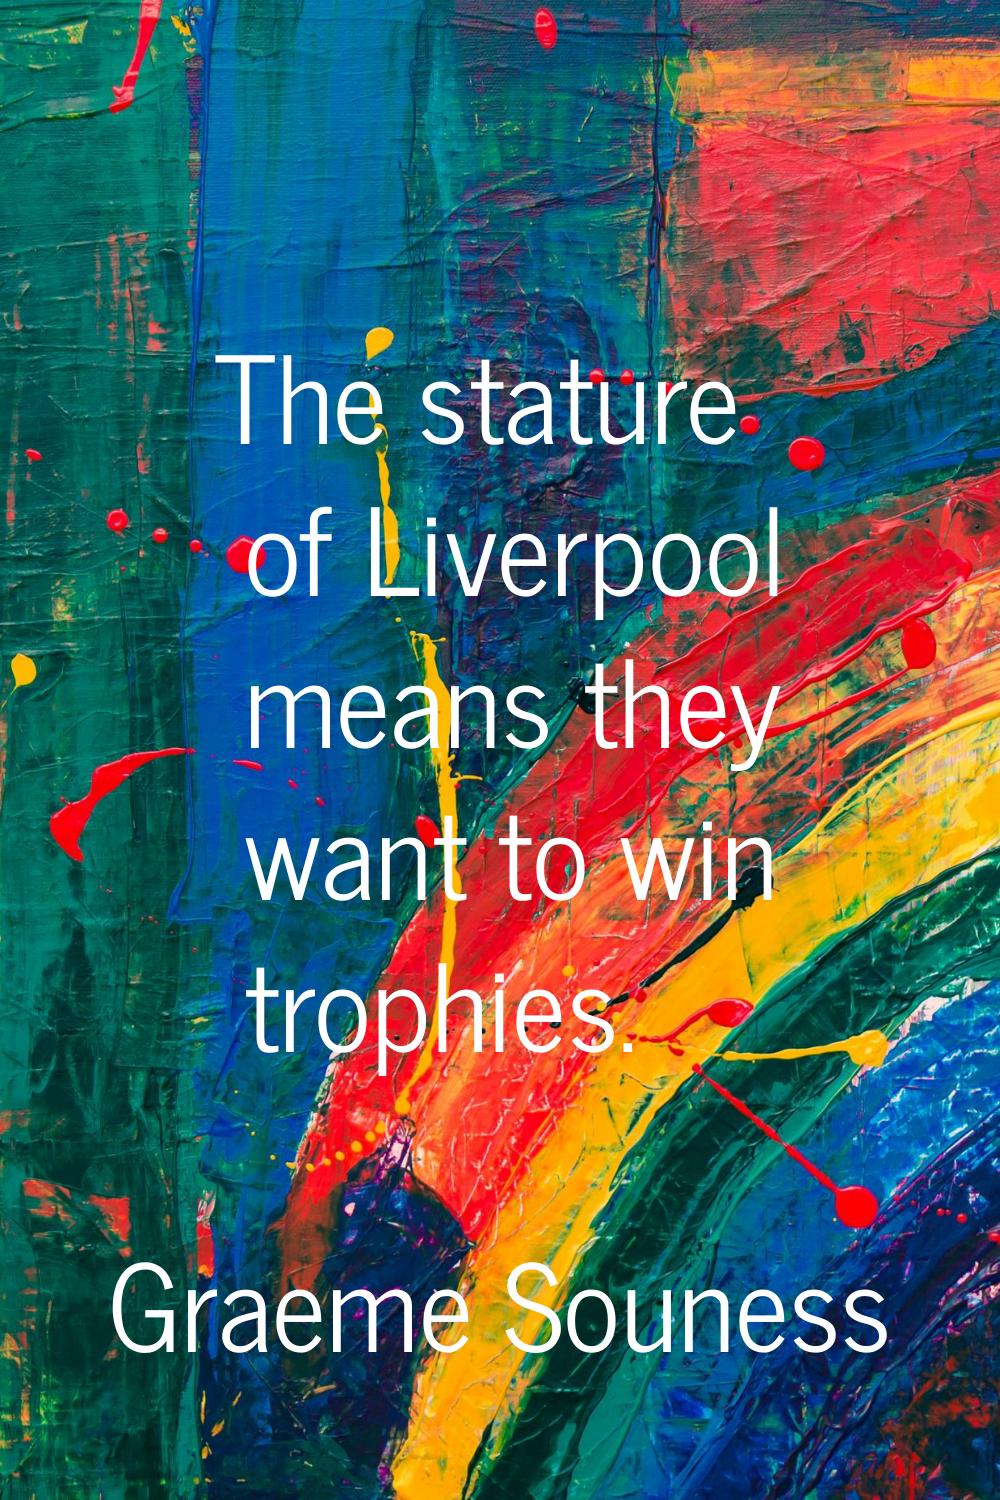 The stature of Liverpool means they want to win trophies.